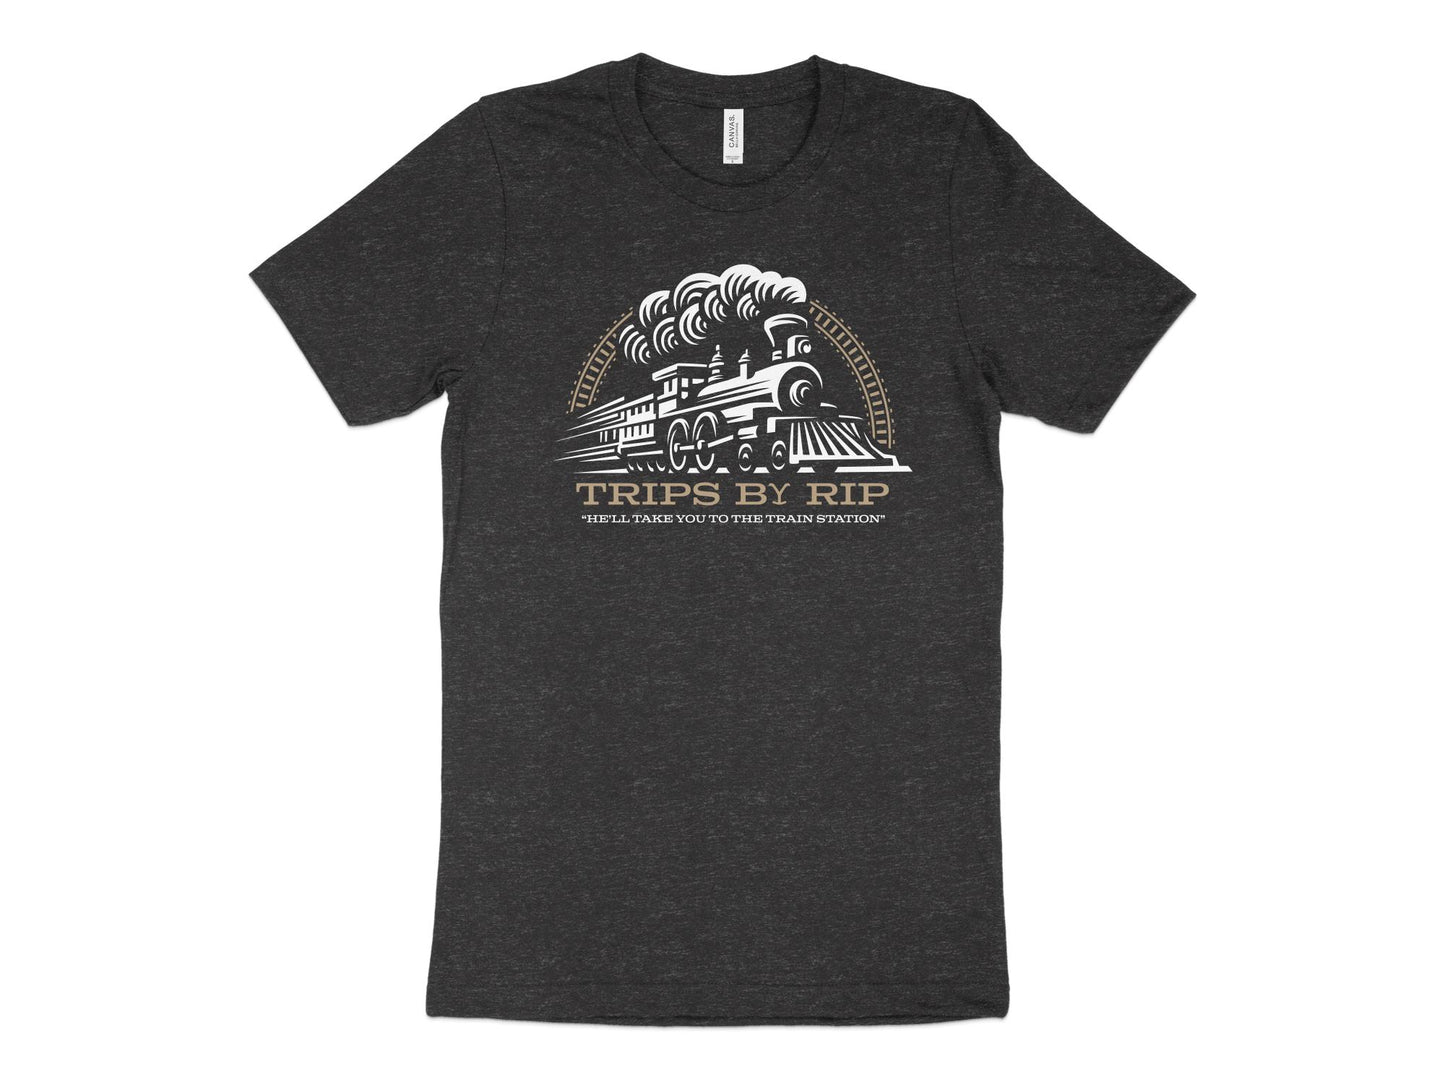 Yellowstone T Shirt - Trips By Rip charcoal